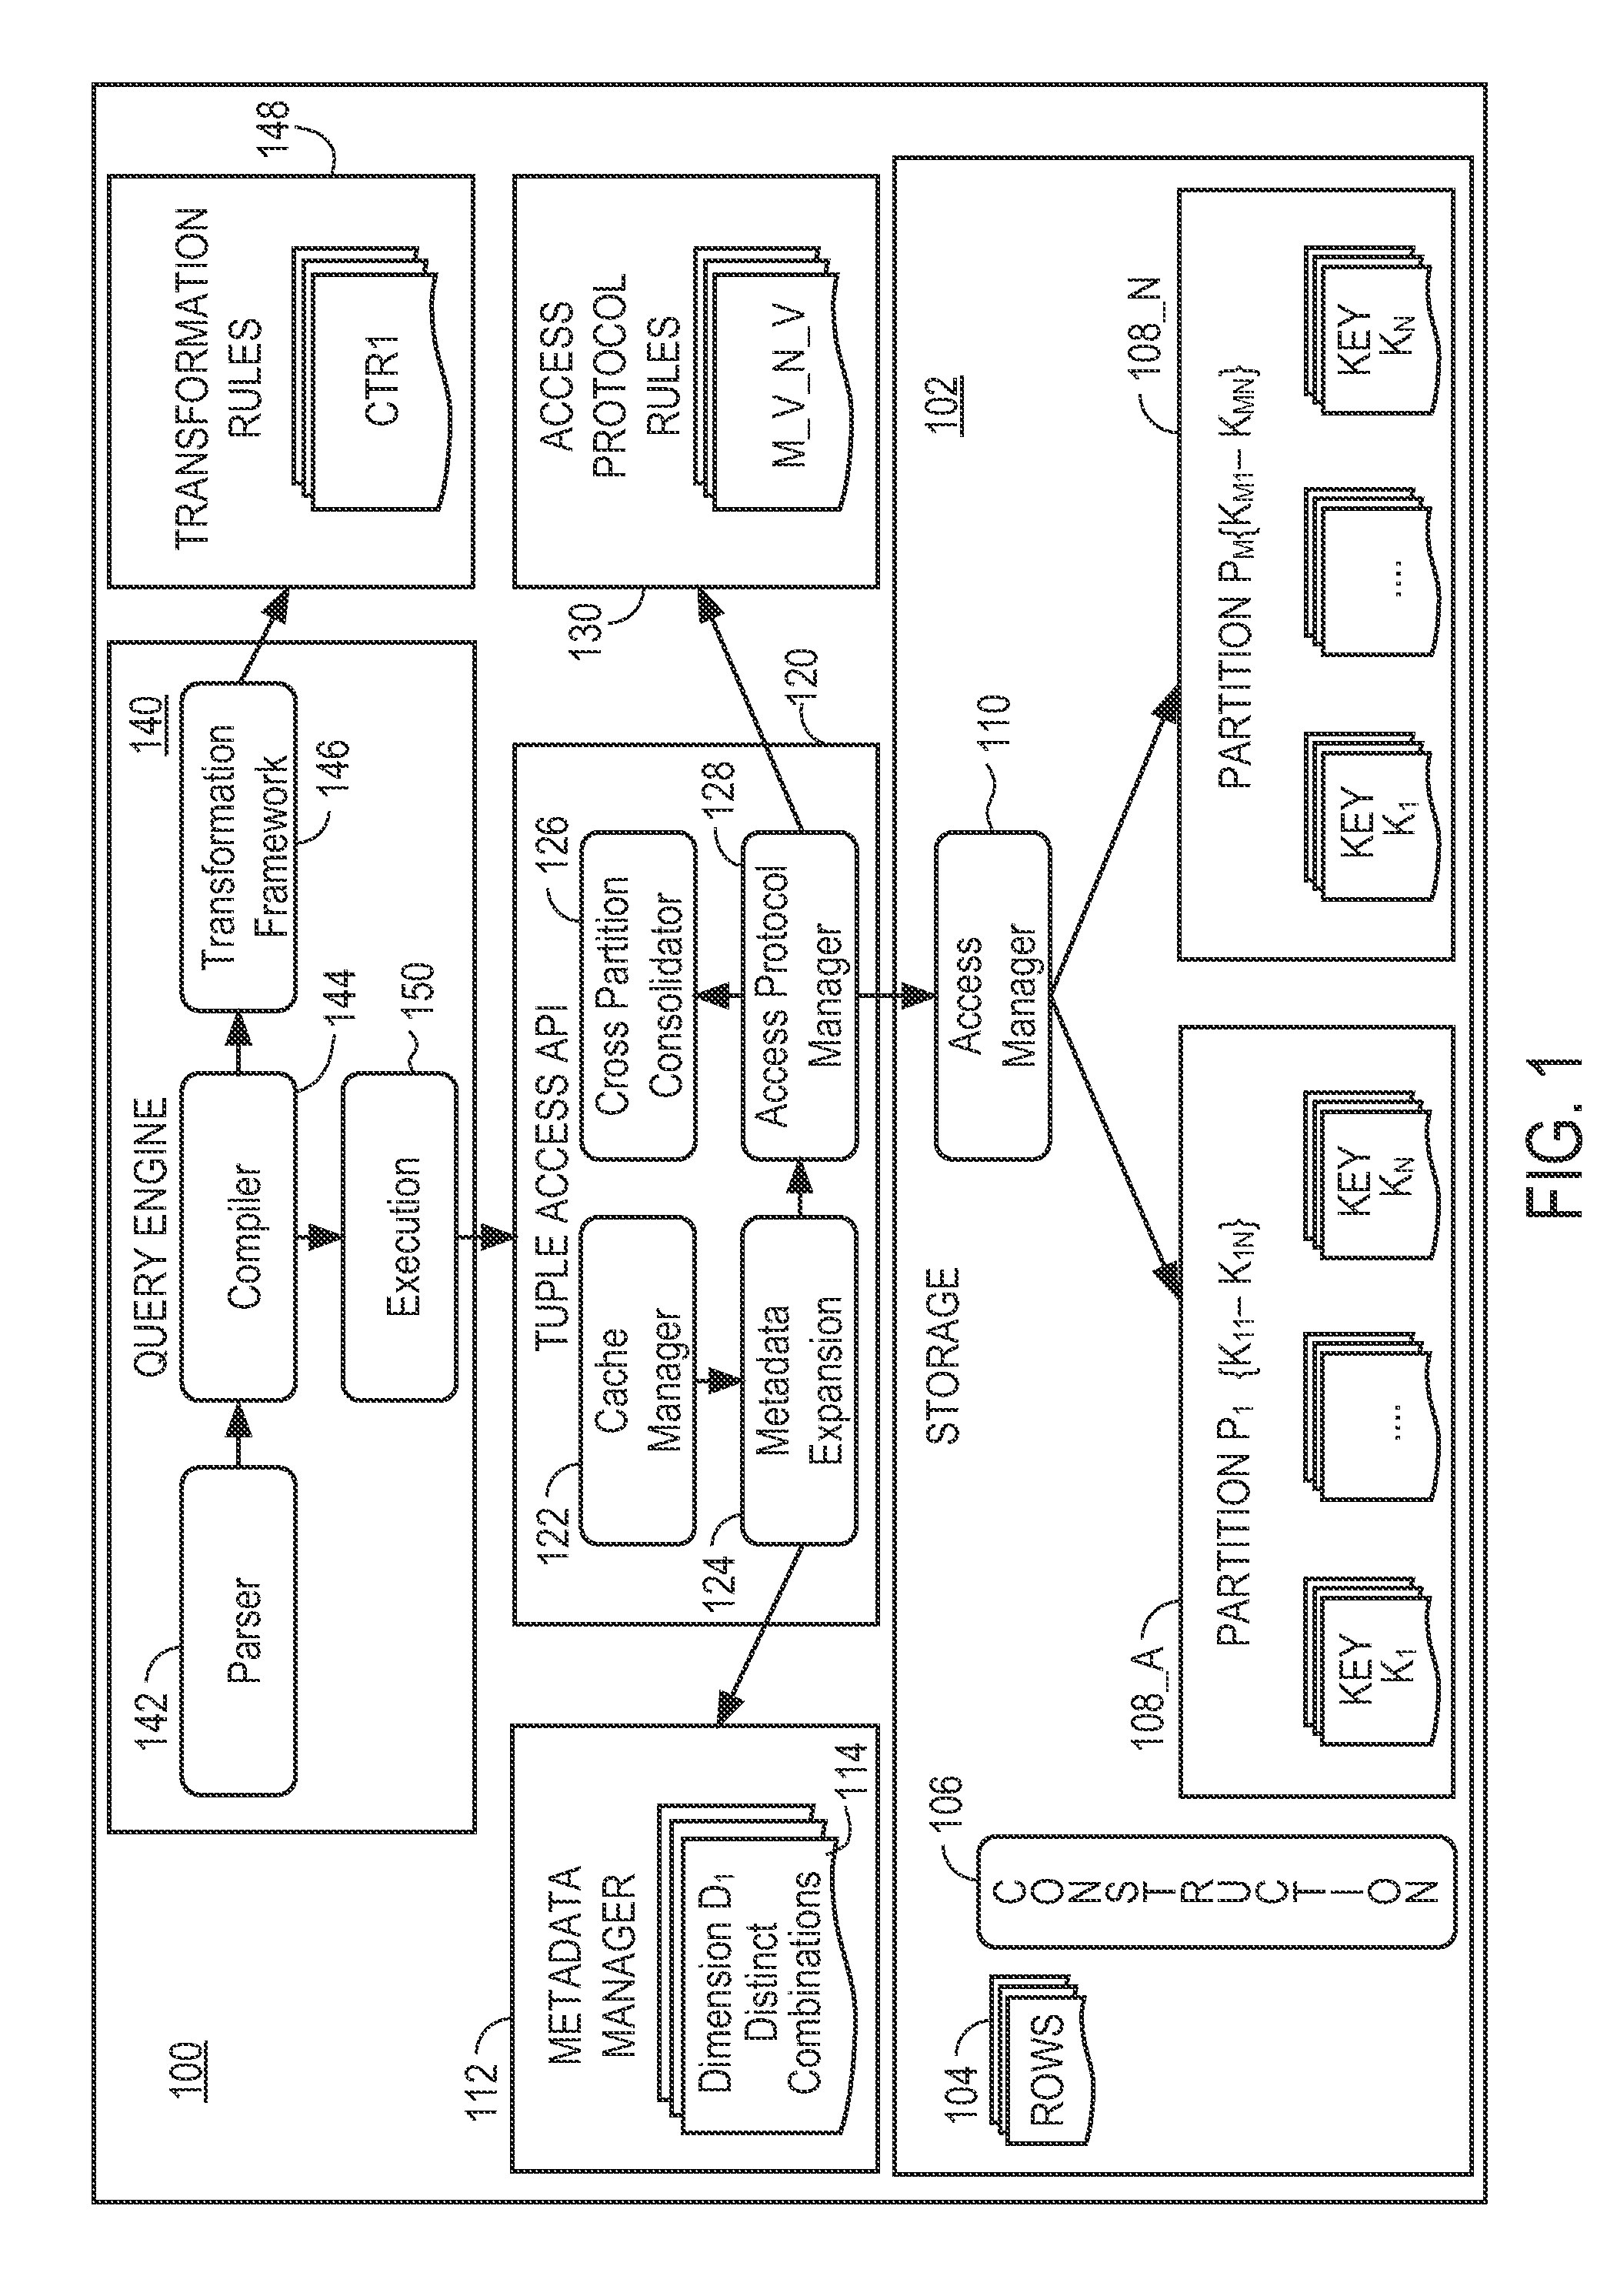 Apparatus and method for accessing materialized and non-materialized values in a shared nothing system